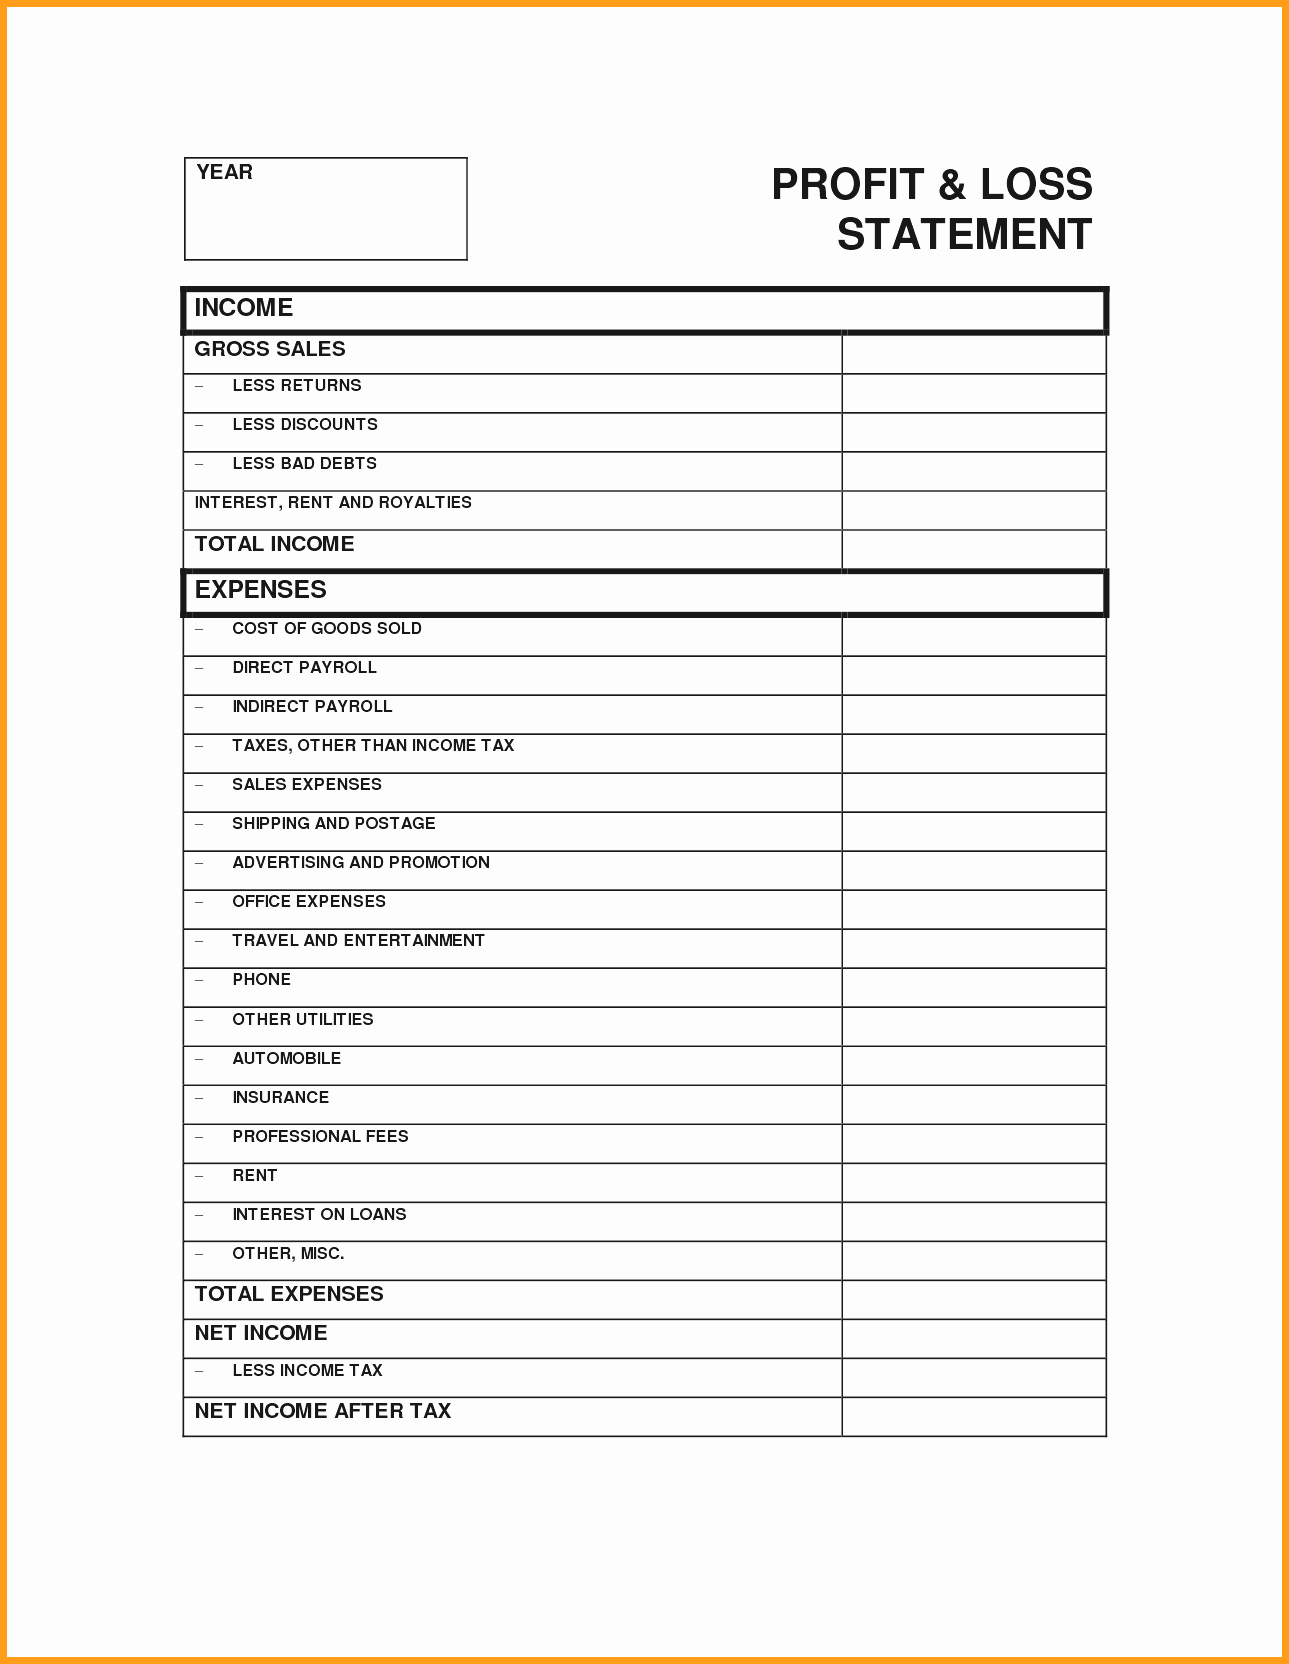 Profit and Loss Statement Simple Best Of Basic Profit and Loss Statement Template Mughals